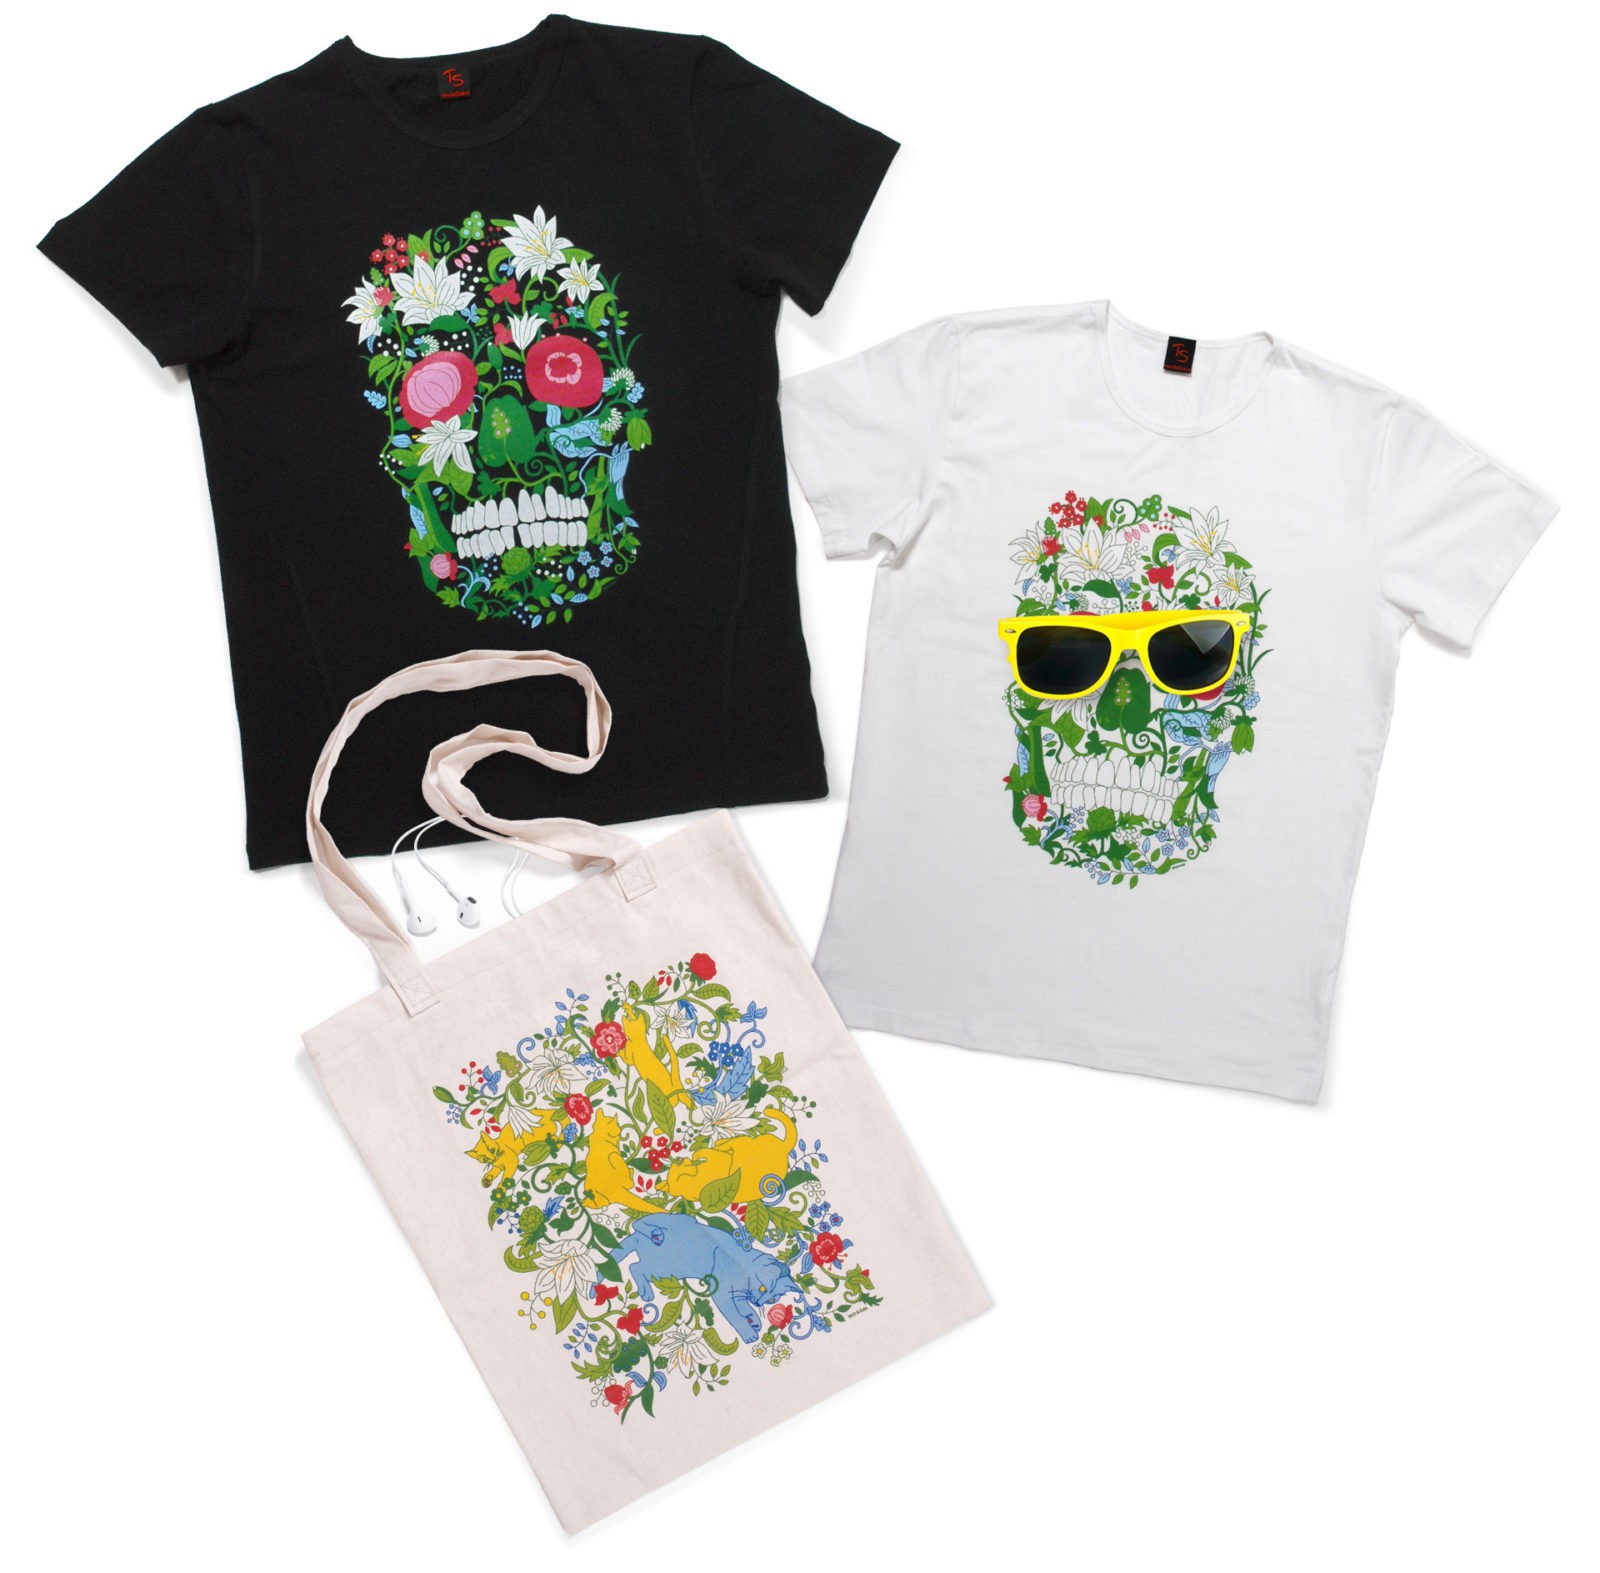 Illustrations for  t-shirts and bags